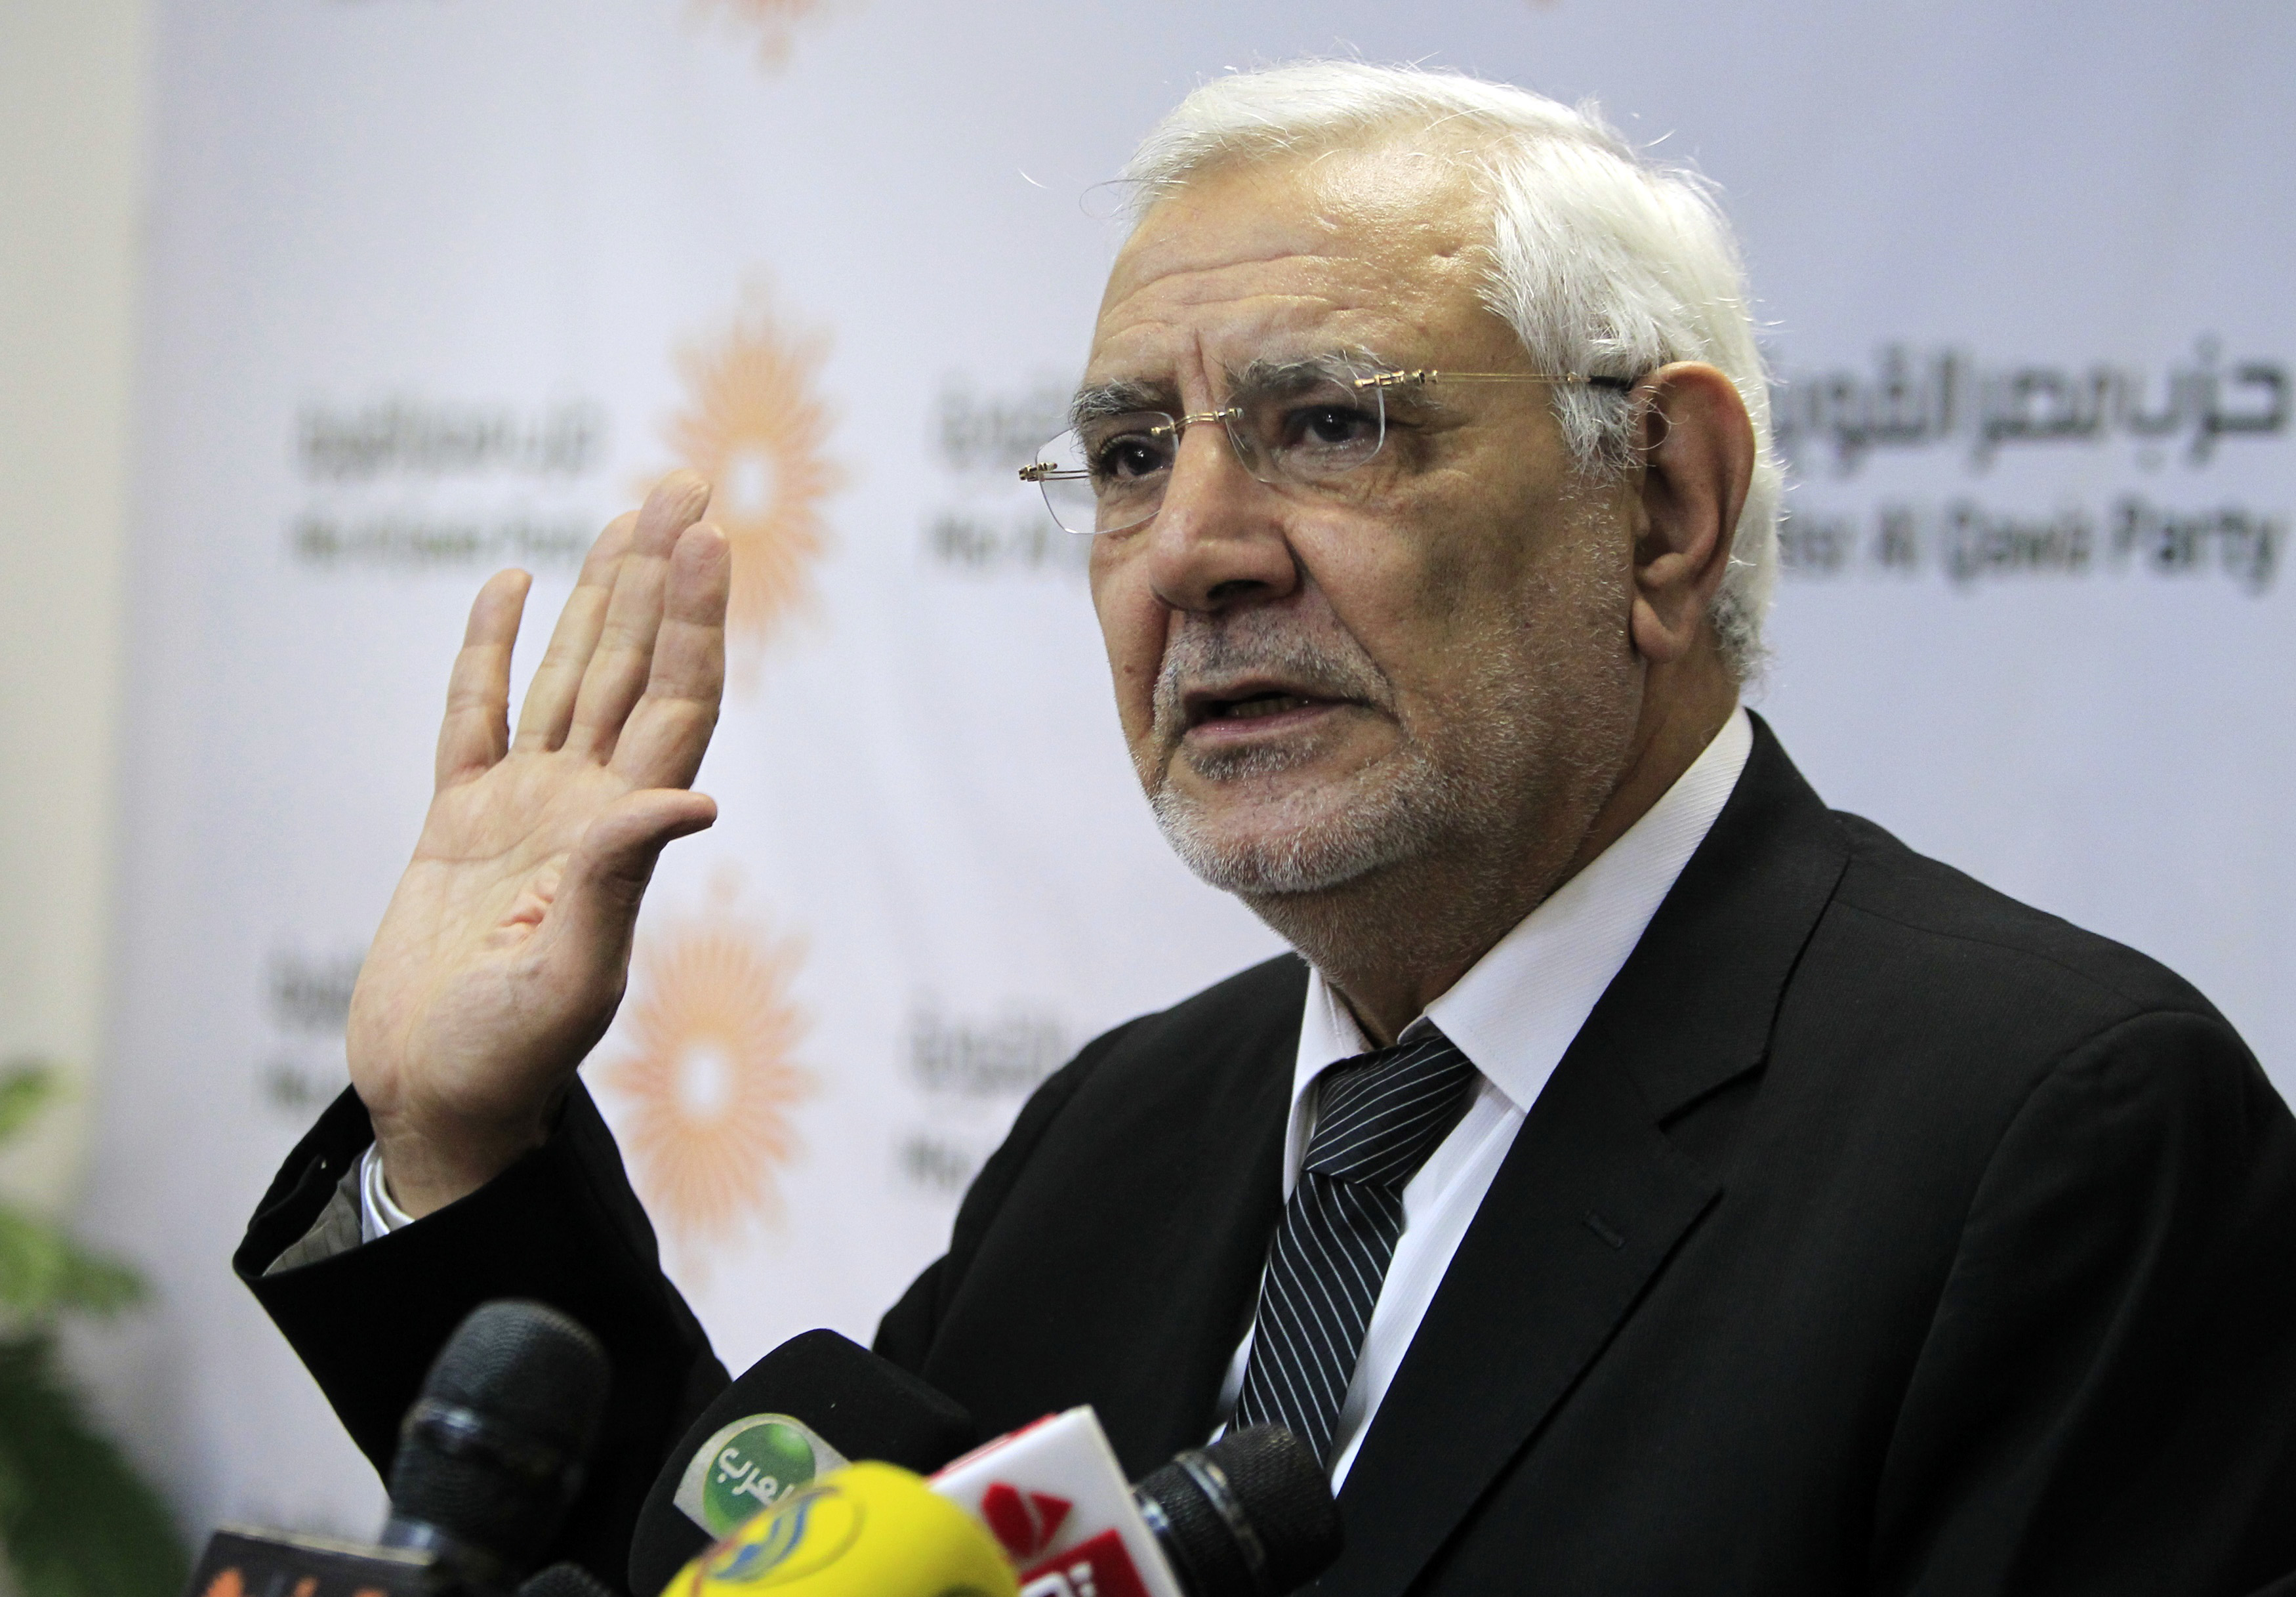 Chairman of the Masr El Kaweya (Strong Egypt) party, Abdel Moneim Aboul Fotouh, speaks during a news conference in Cairo